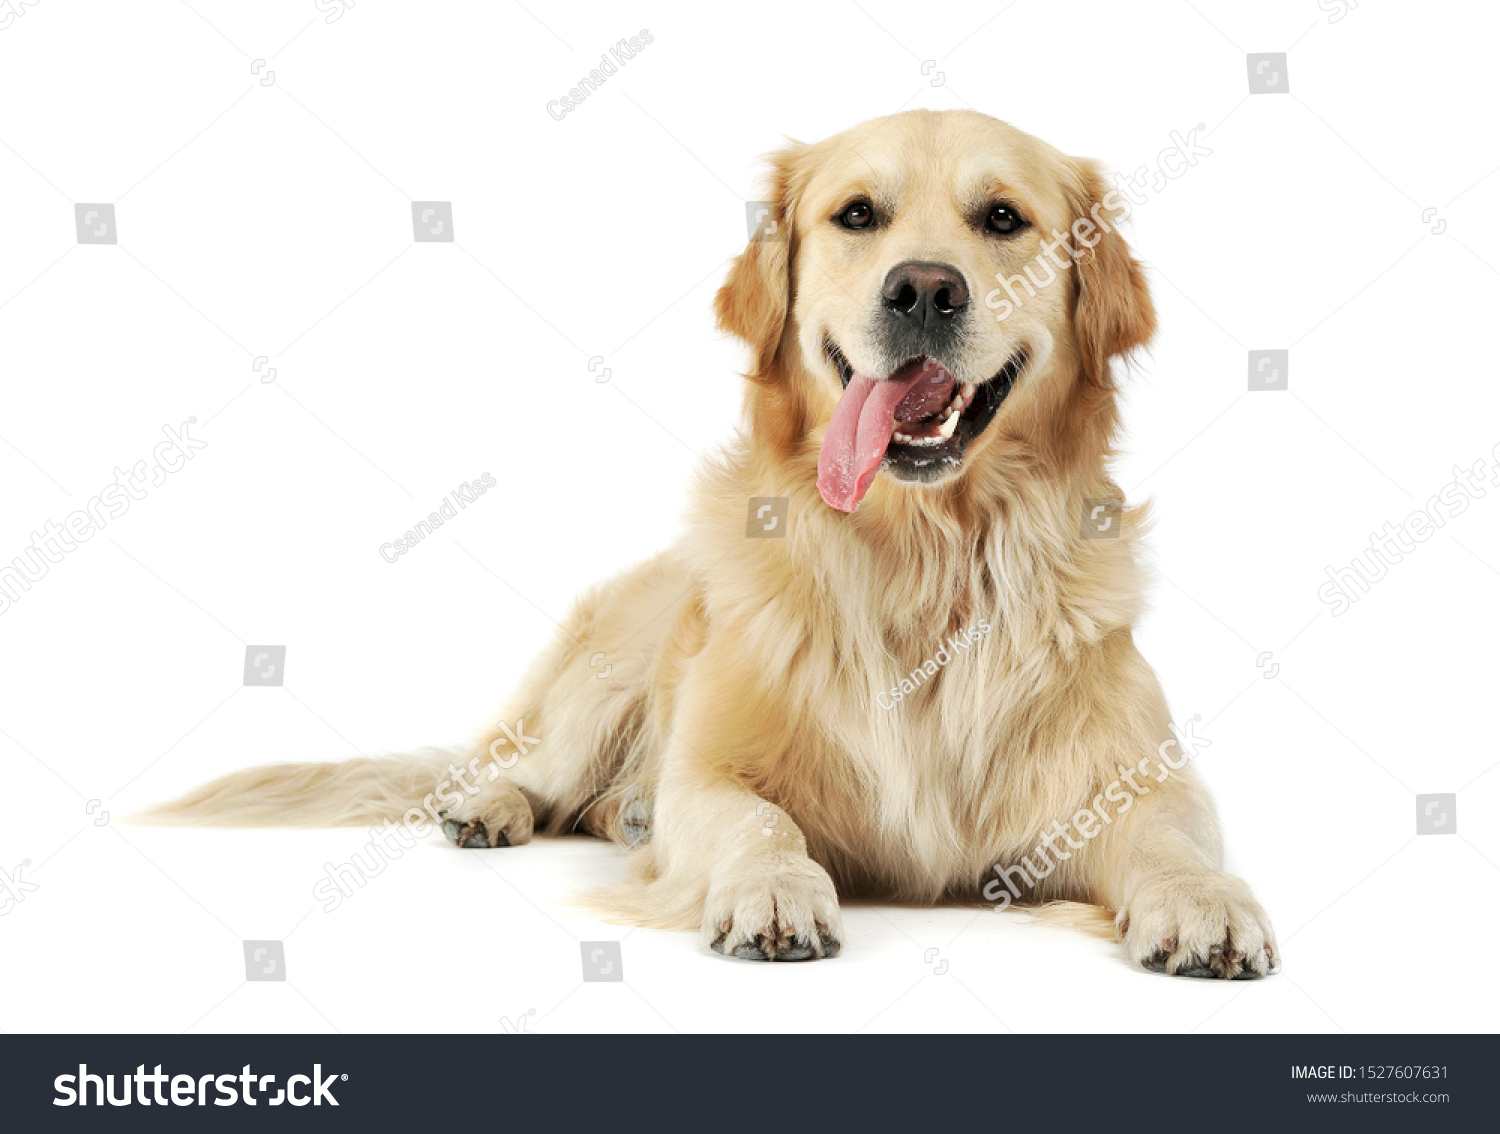 Studio shot of an adorable Golden retriever lying with hanging tongue - isolated on white background. #1527607631